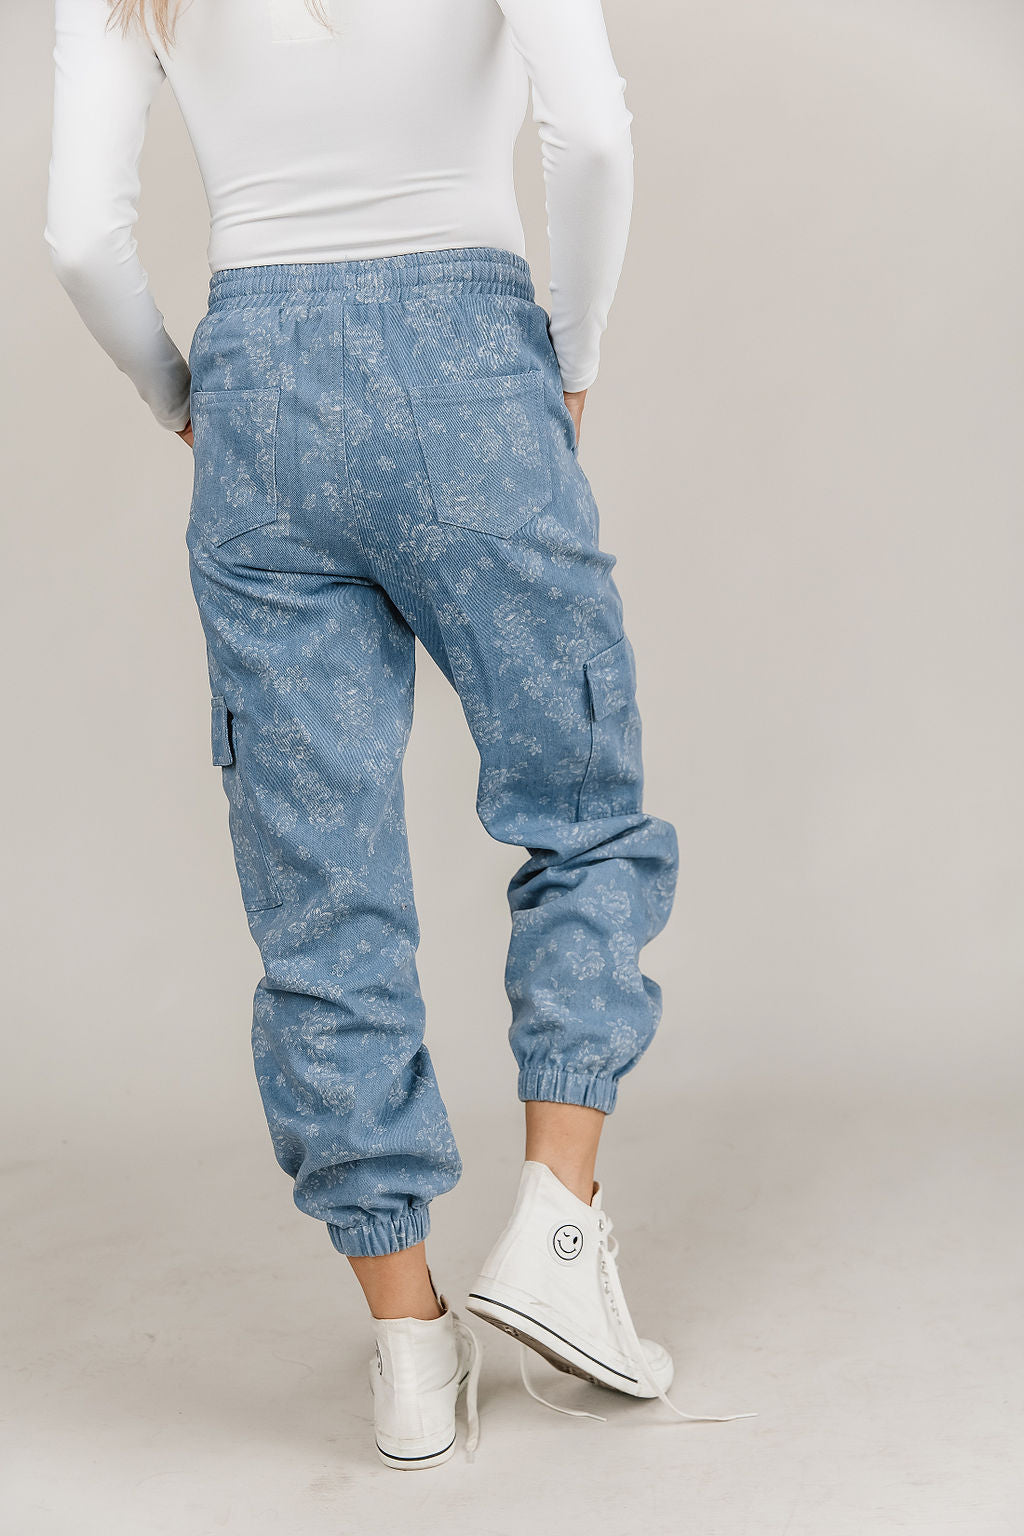 Ampersand Avenue - Floral Denim Joggers *Small Only* – Bunky & Marie's  Boutique